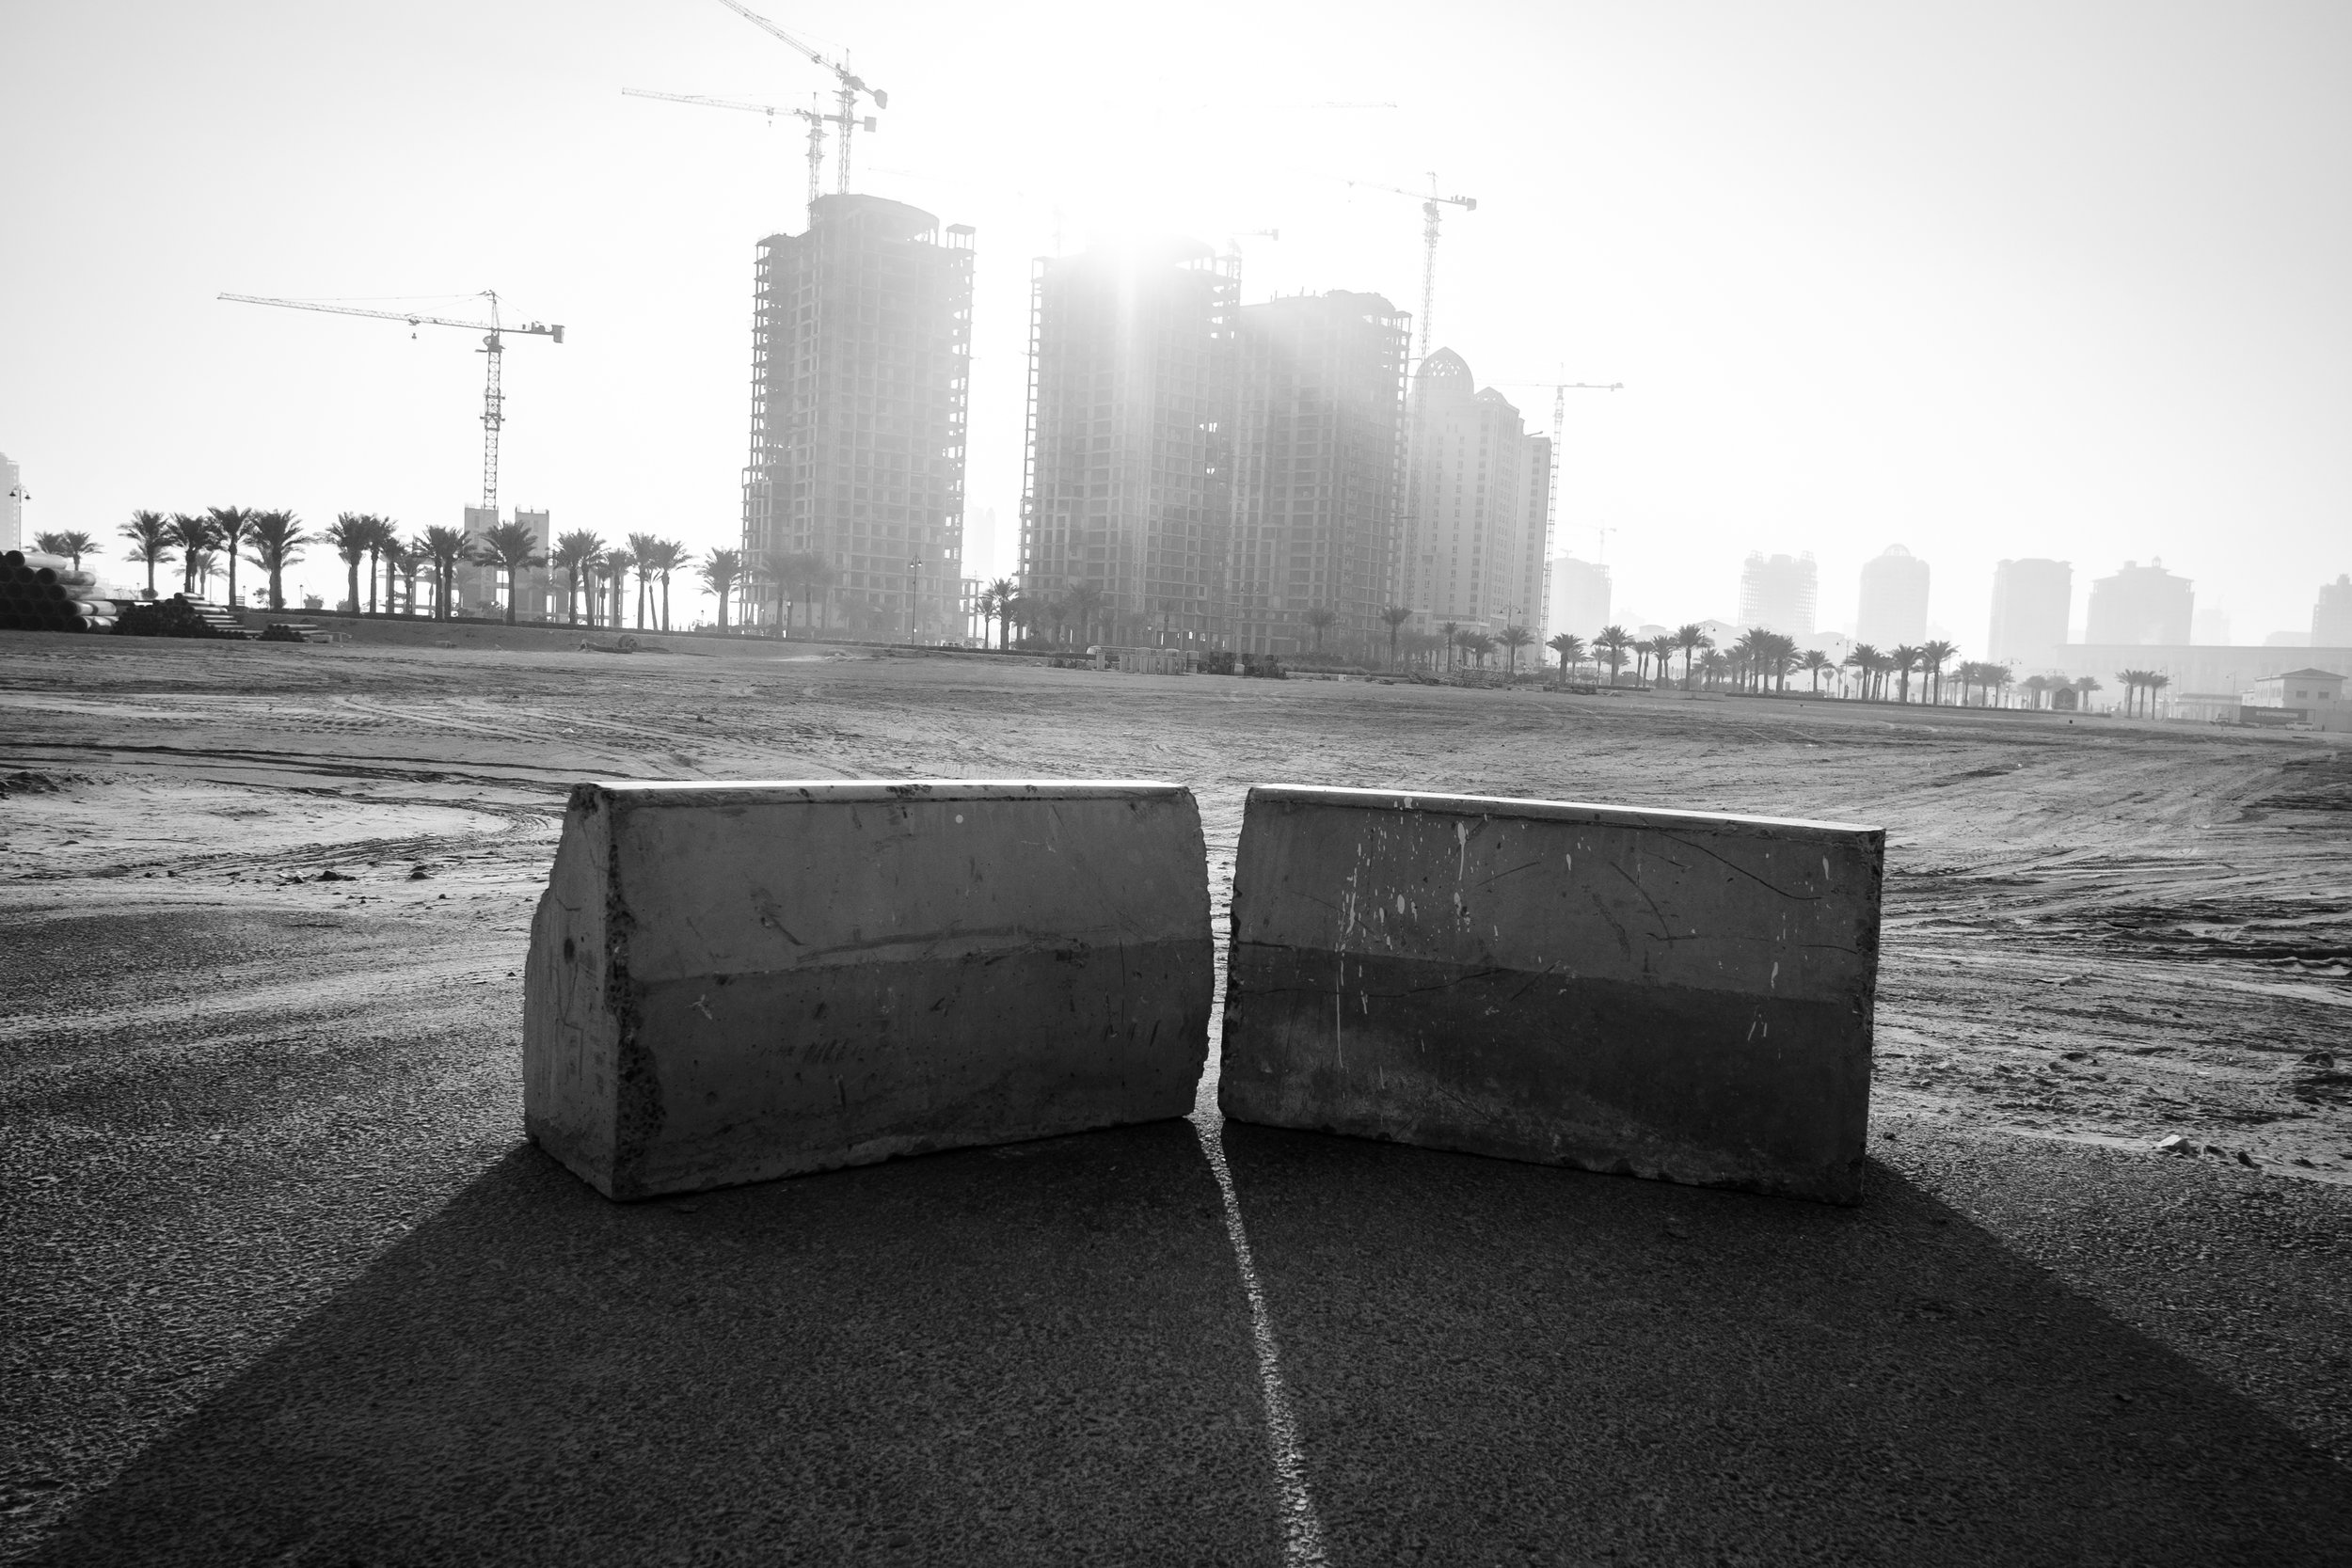  A construction scene on The Pearl with the Viva Bahriya Towers residential development in the background. The Pearl is an artificial island comprising of luxury residential estates and businesses. It is the first land in Qatar made available for own